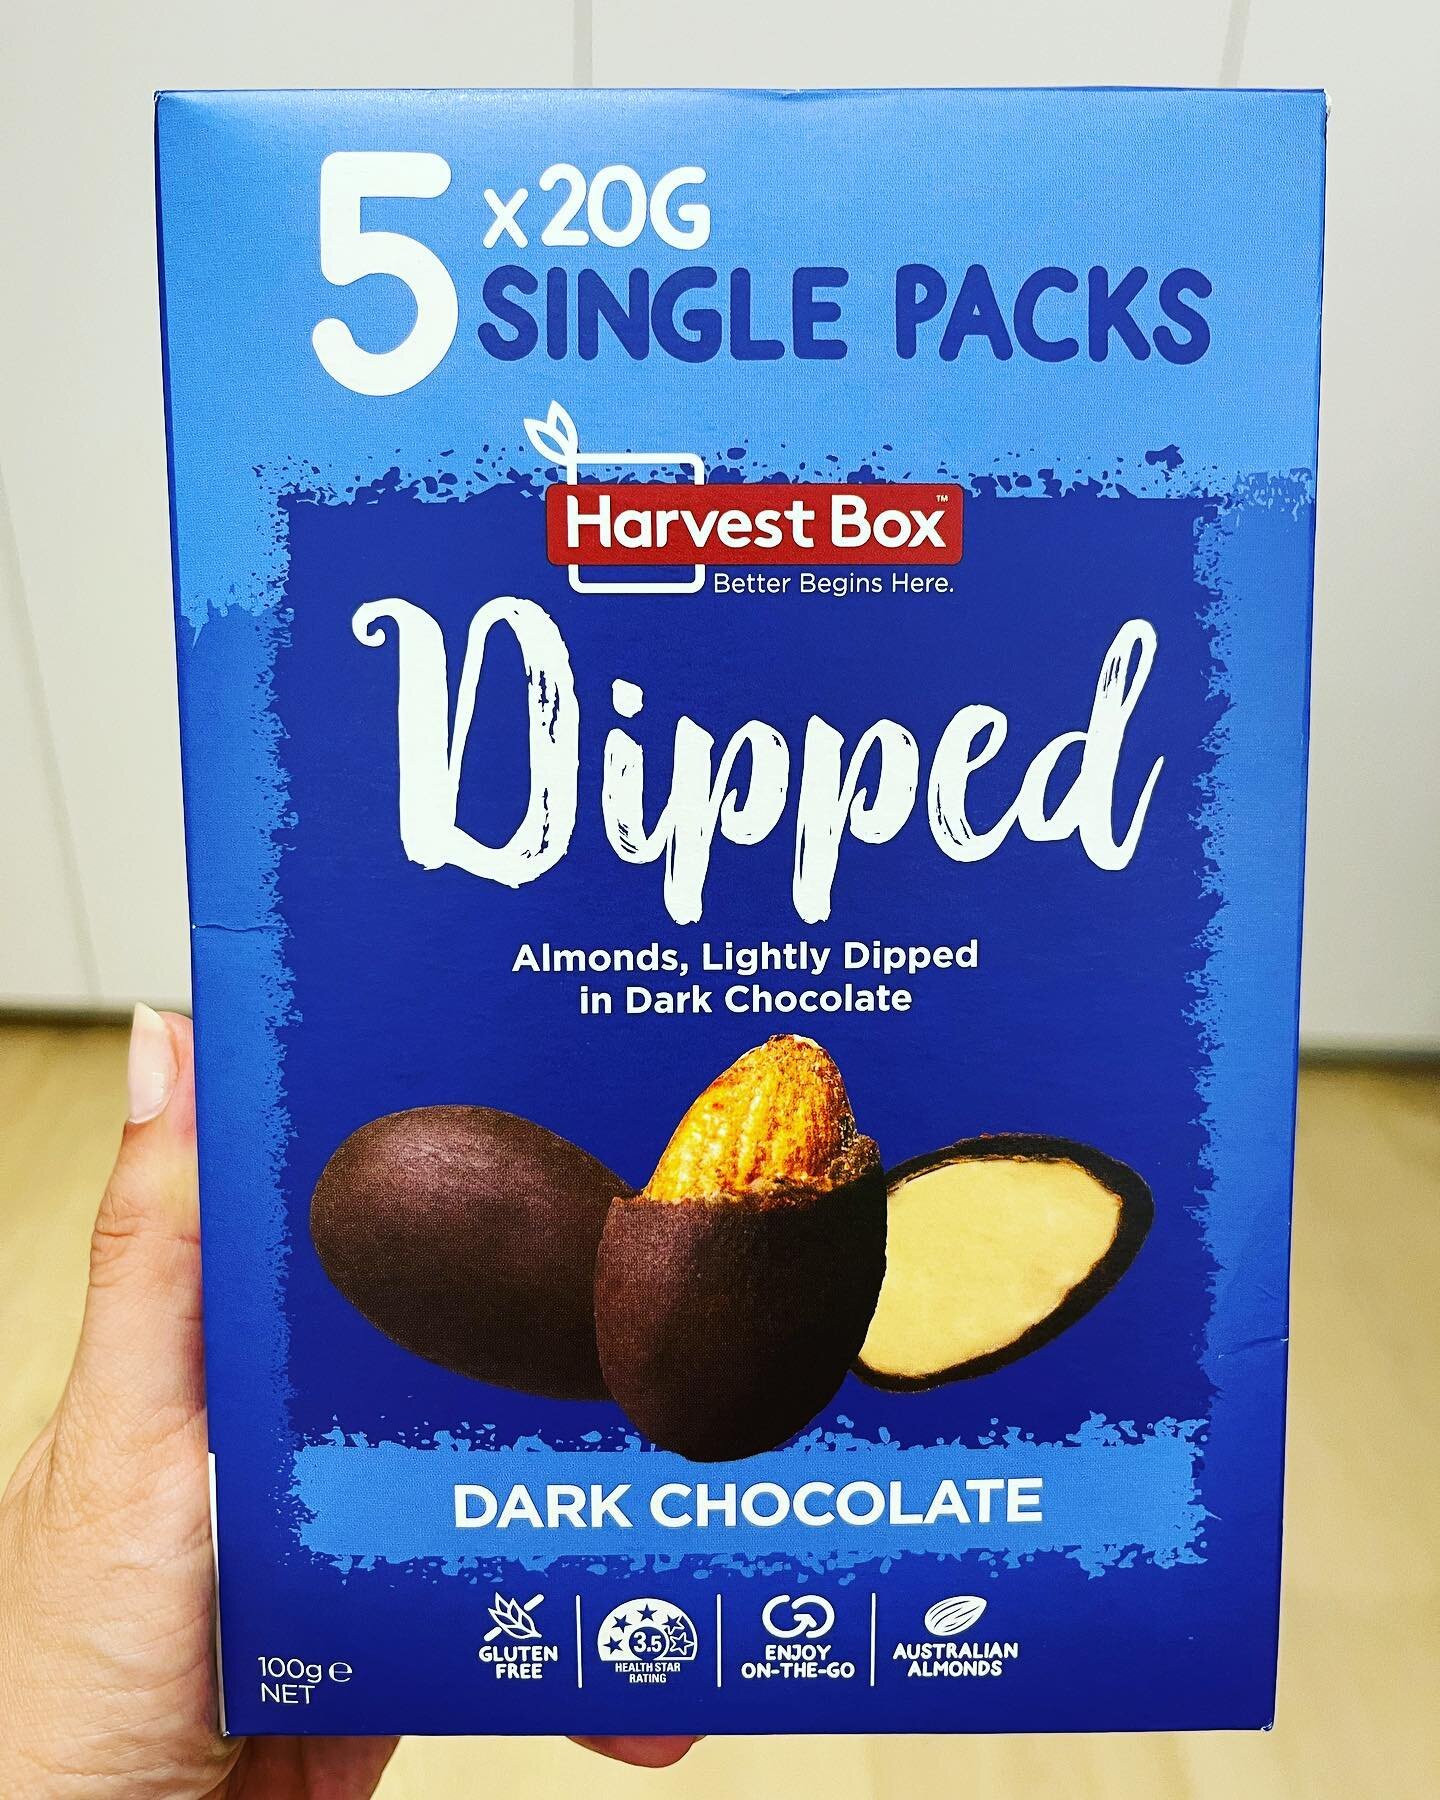 This is a great new sweet snack on the go. In a convenient portion controlled packet, with 70% almonds and 30% dark chocolate one can appreciate the best of both worlds - the nutrition from the almonds and the sweet kick from the chocolate. Available